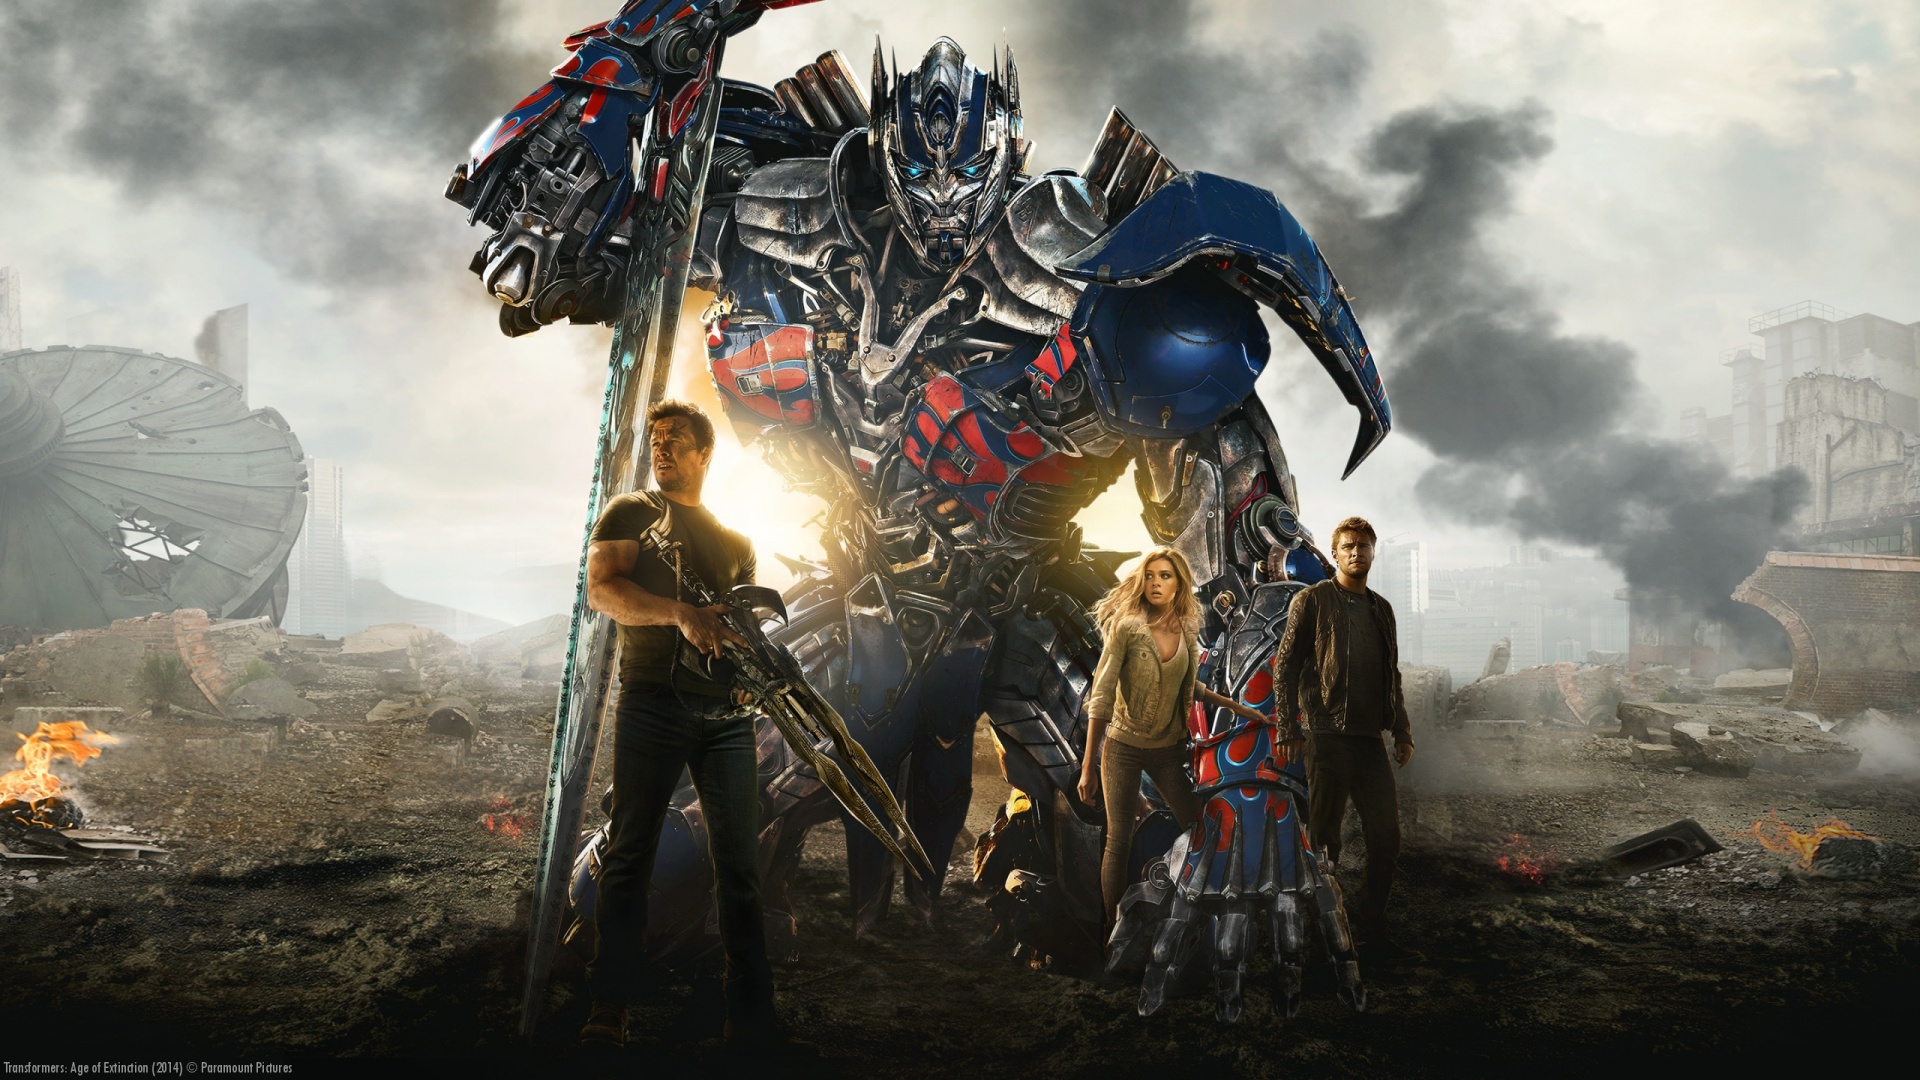 transformers 4 age of extinction-1920x1080 1